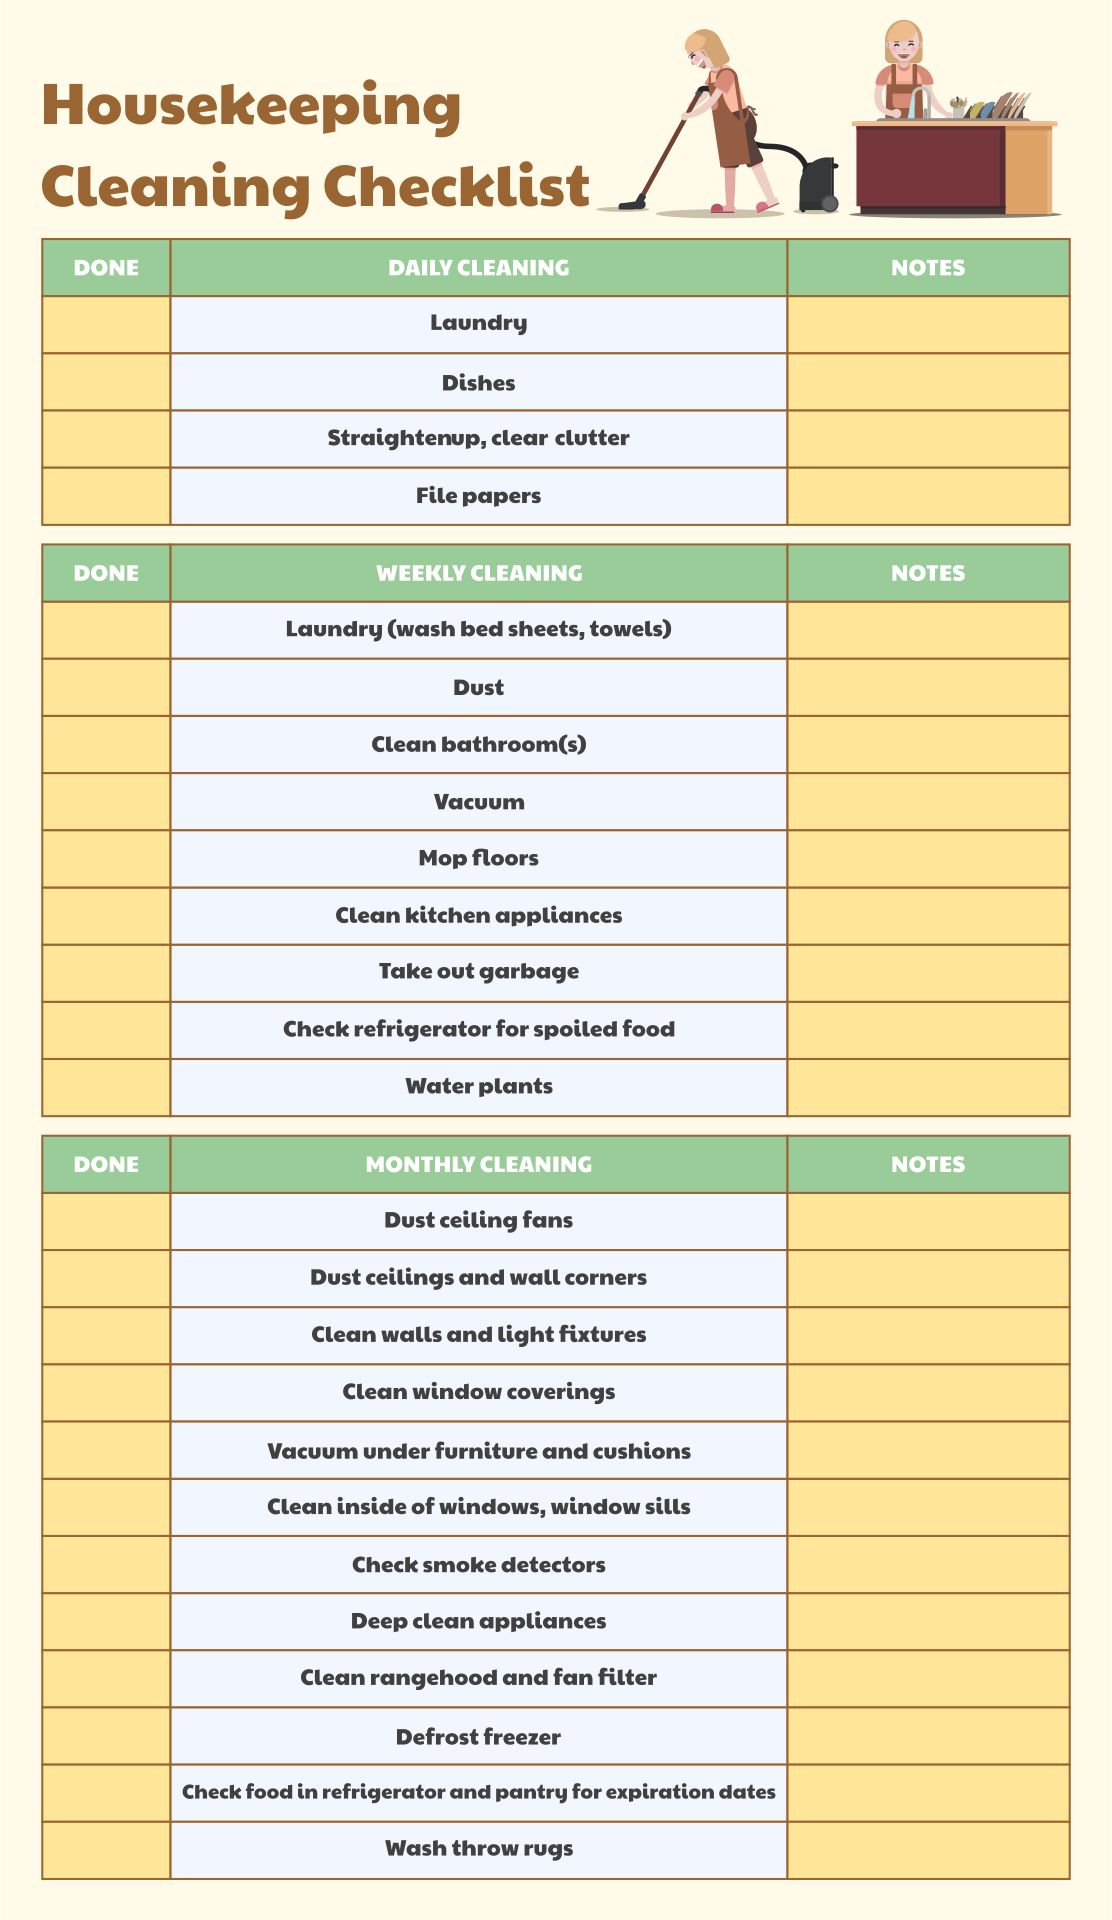 Housekeeping Cleaning Checklist Template